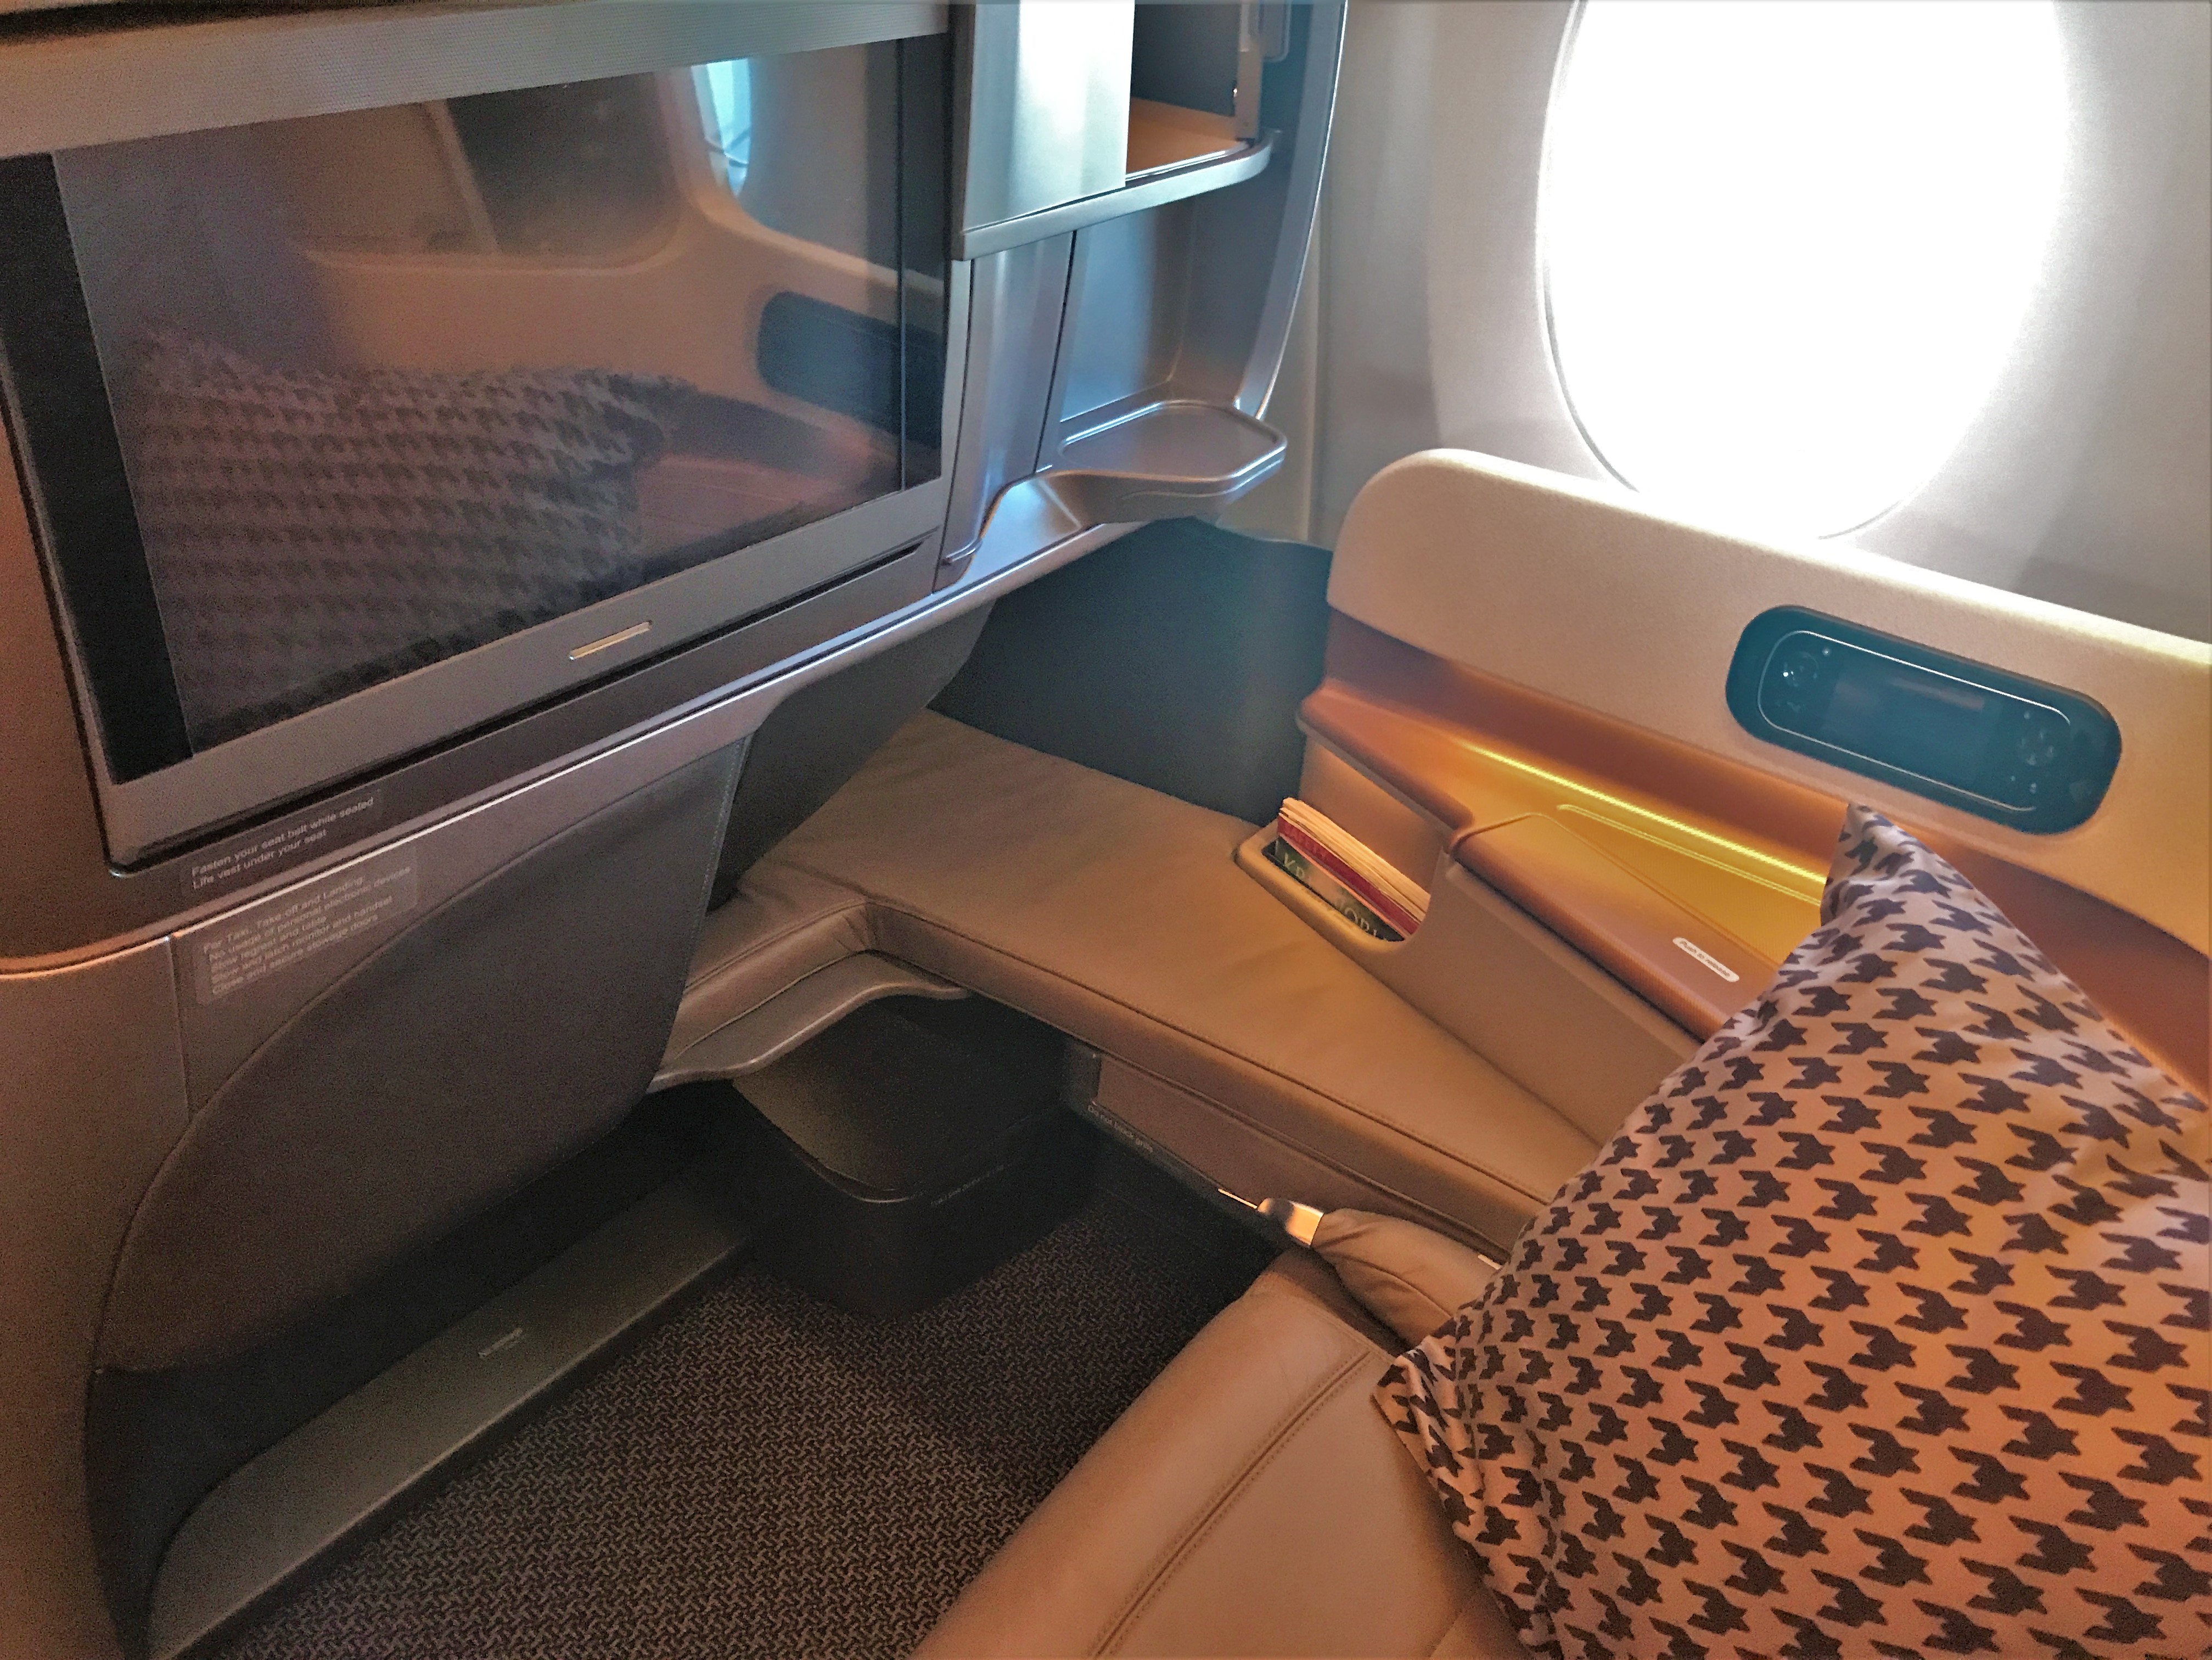 Singapore airlines A350 business class review stockholm